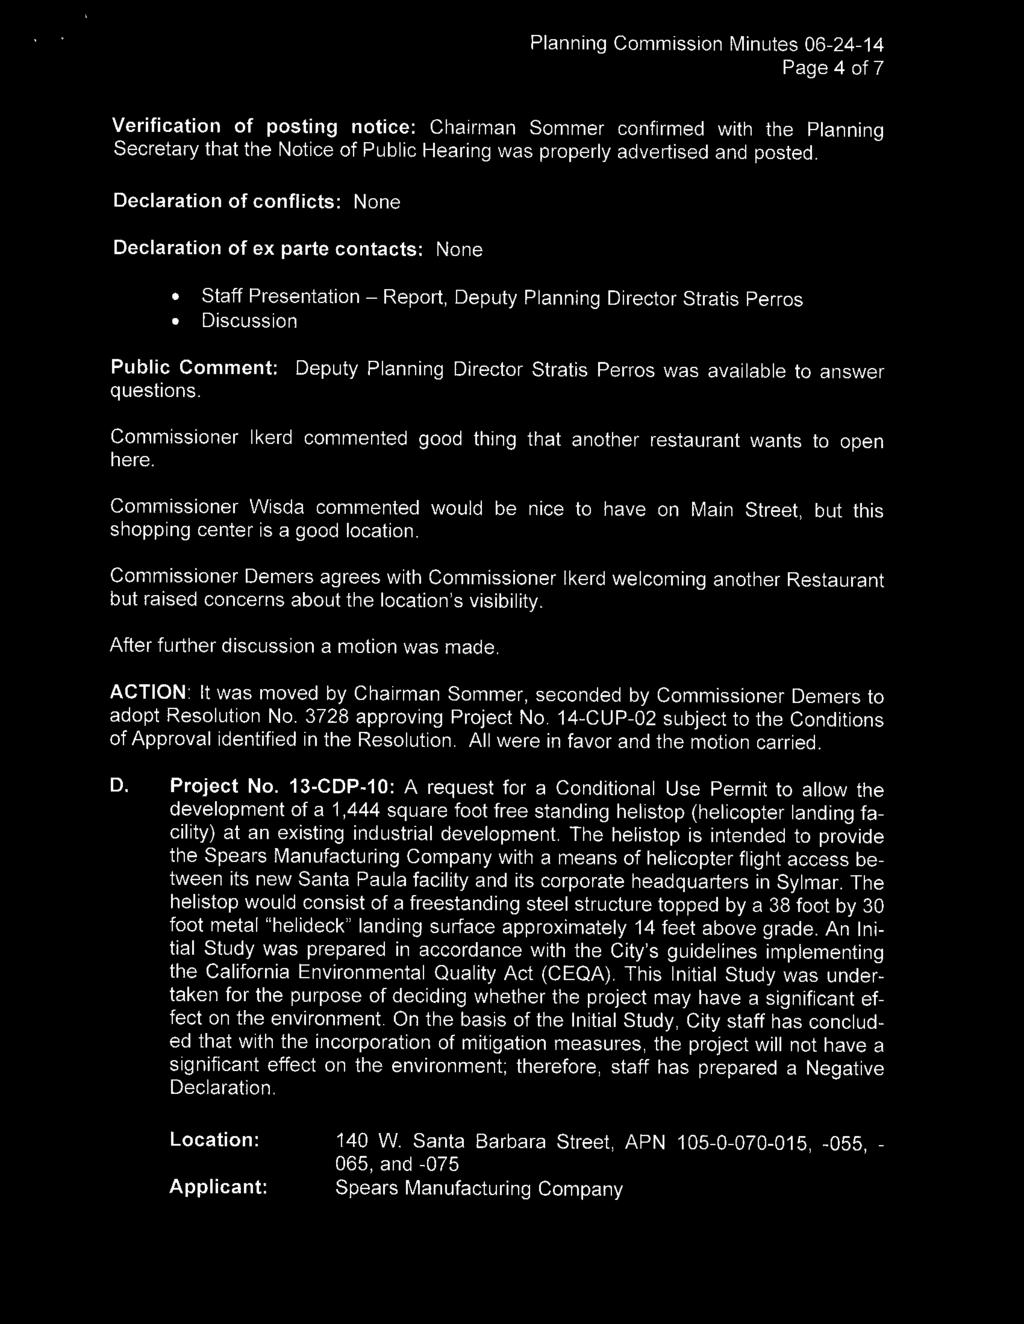 Page 4 of 7 Verification of posting notice: Chairman Sommer confirmed with the Planning Secretary that the Notice of Public Hearing was properly advertised and posted.